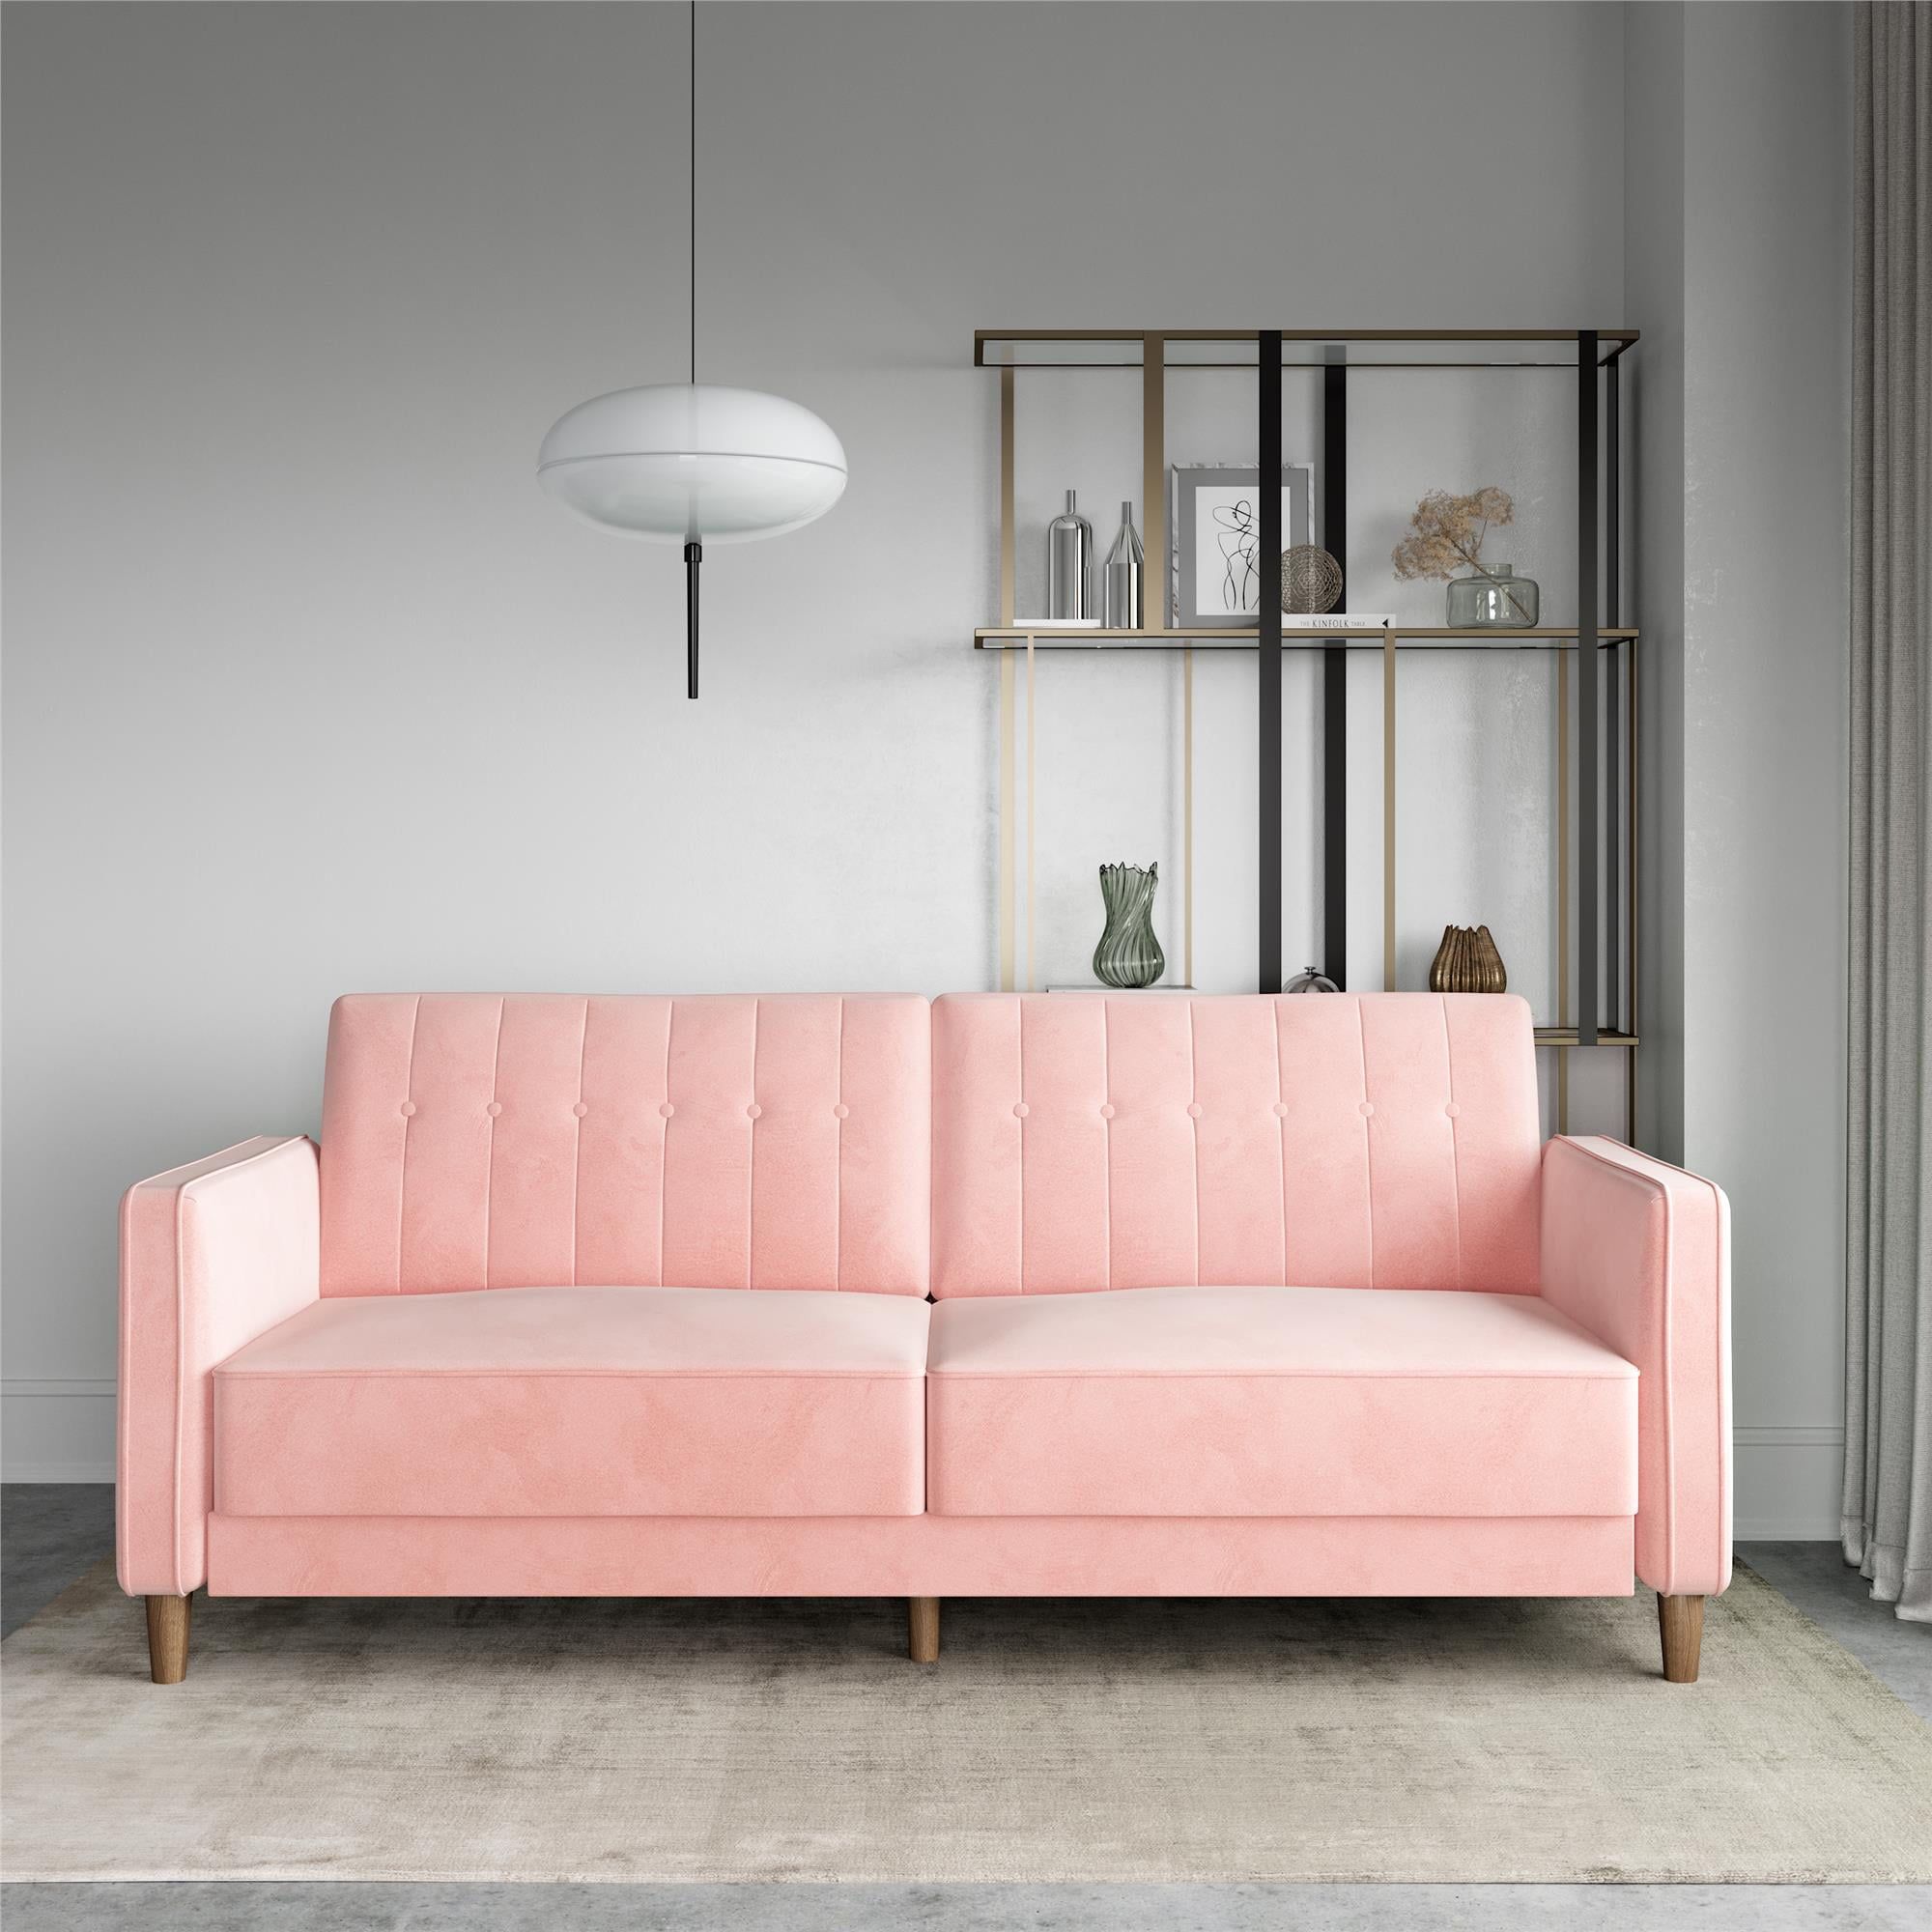 Dhp Pin Tufted Transitional Futon, Convertible Sofa Couch, Pink Velvet Within Tufted Convertible Sleeper Sofas (View 9 of 20)